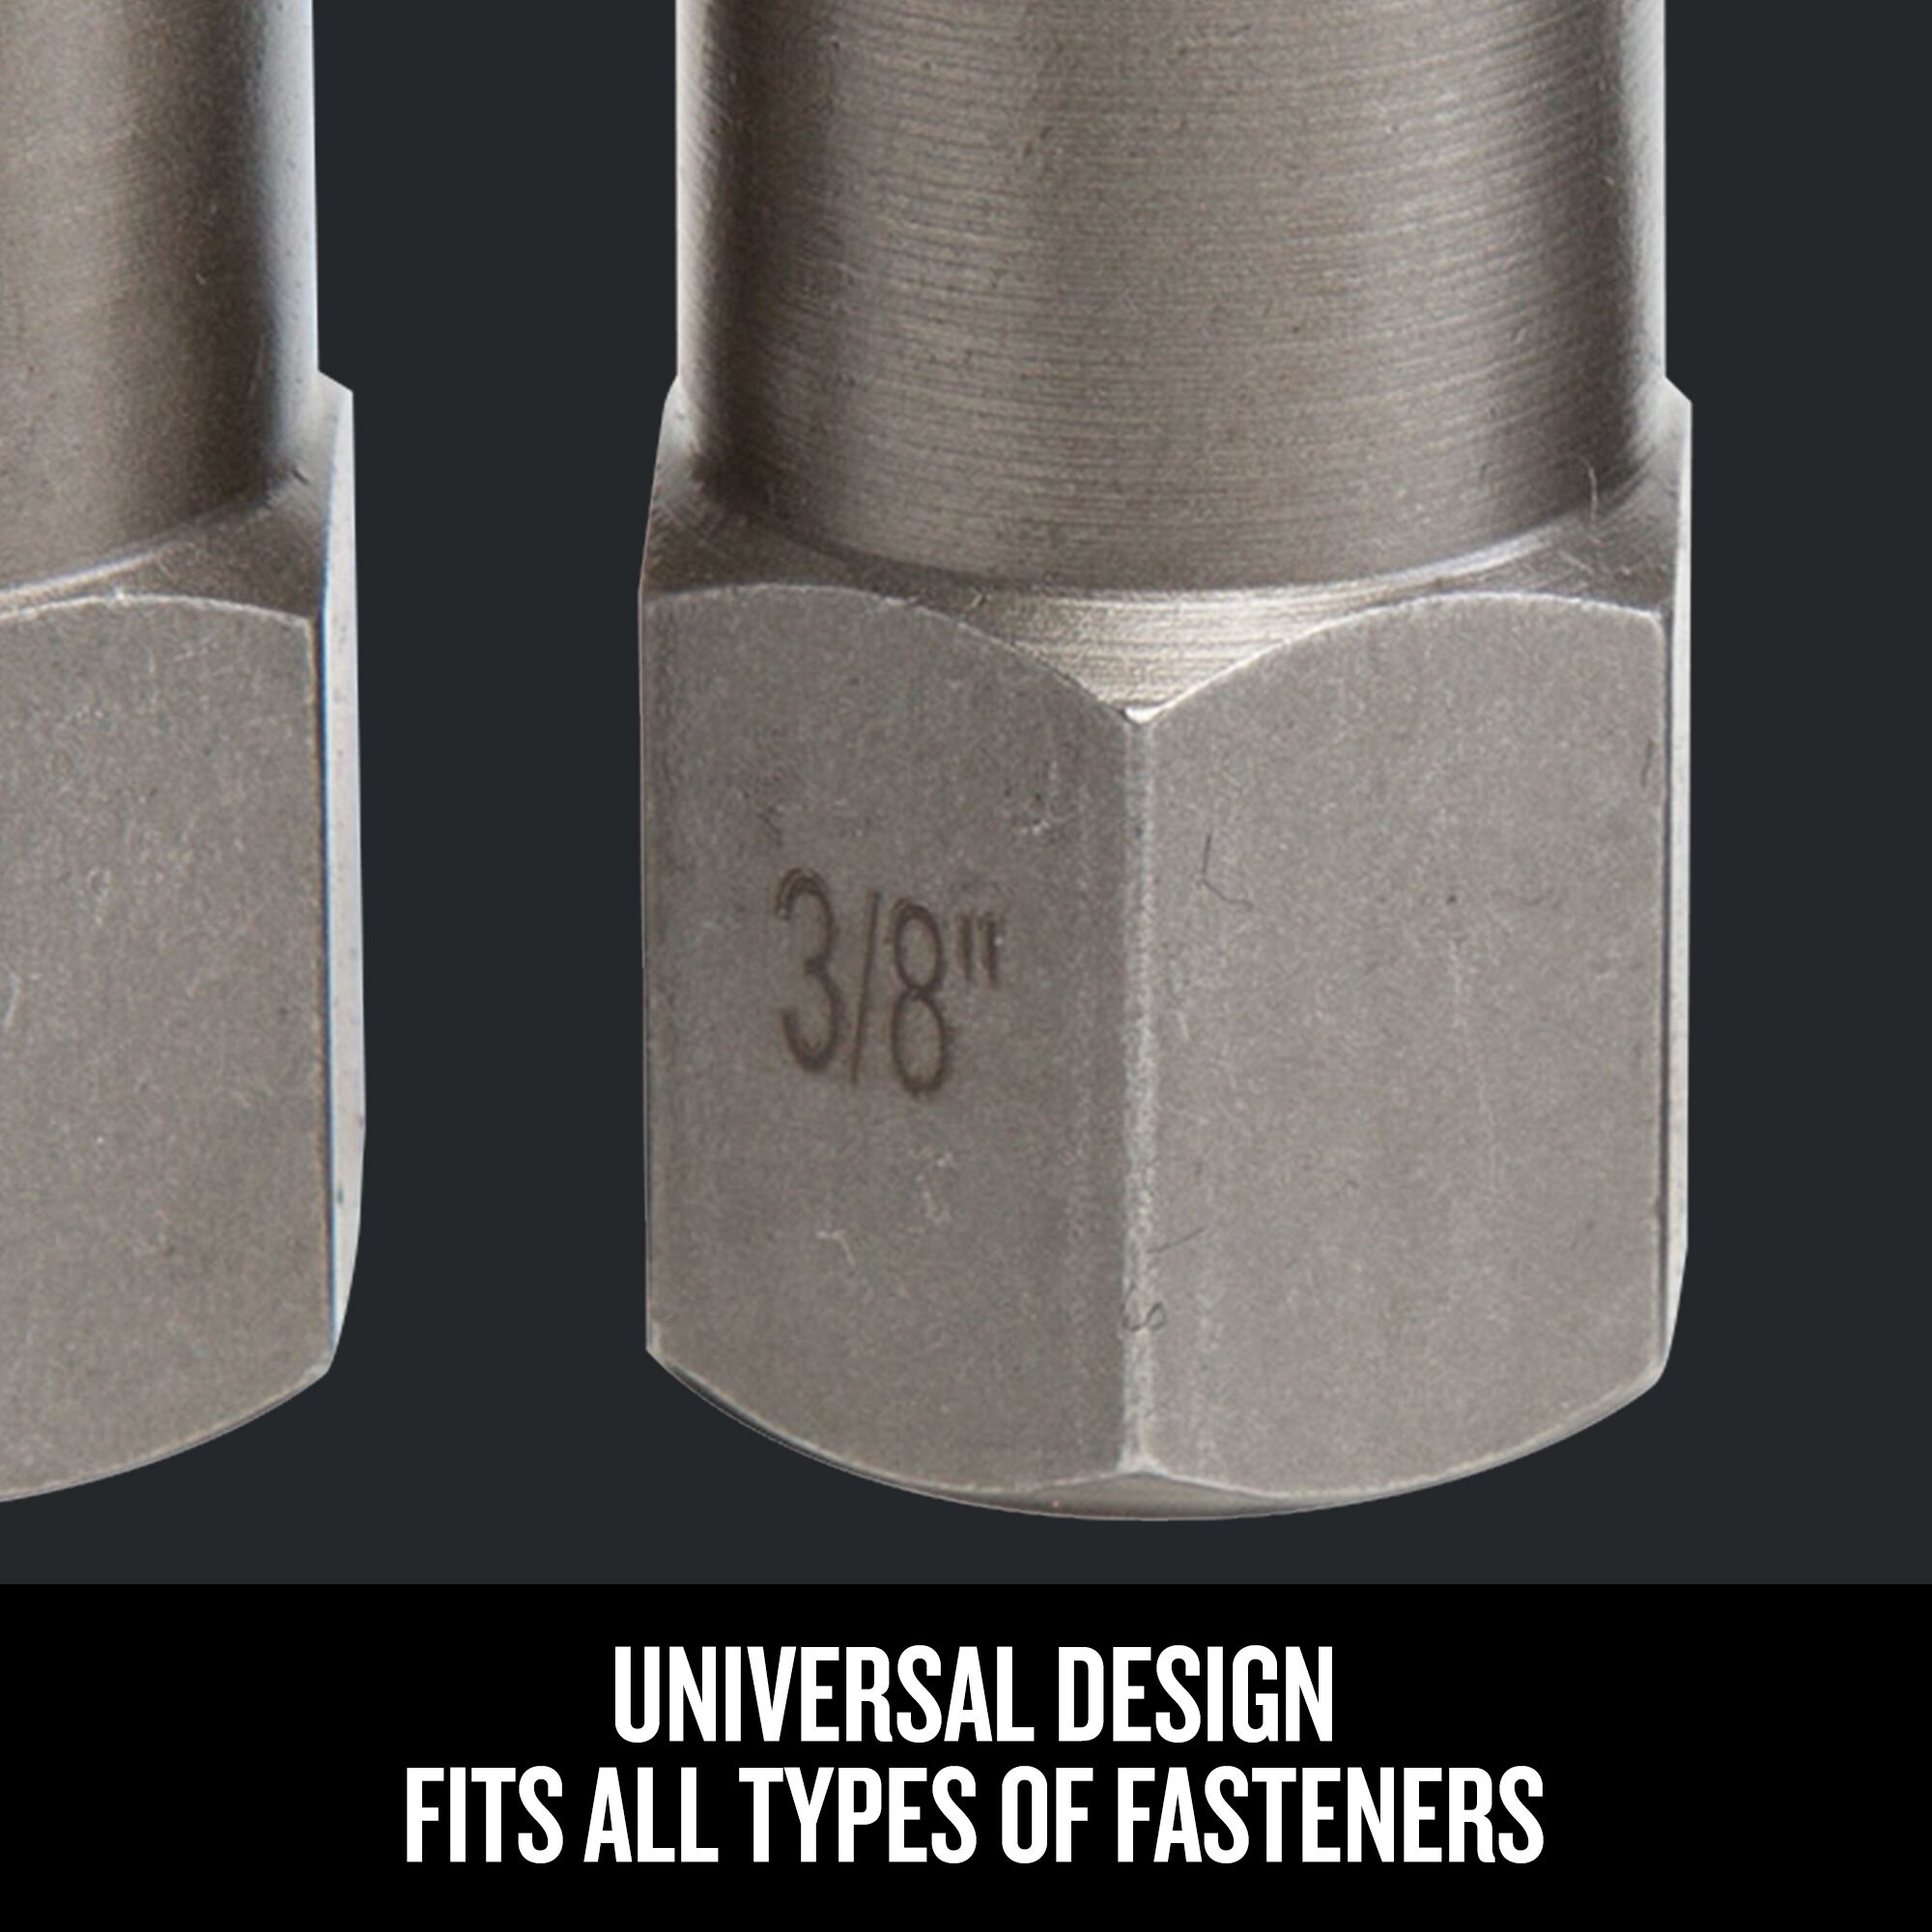 Graphic of CRAFTSMAN Fasteners: Extractors highlighting product features